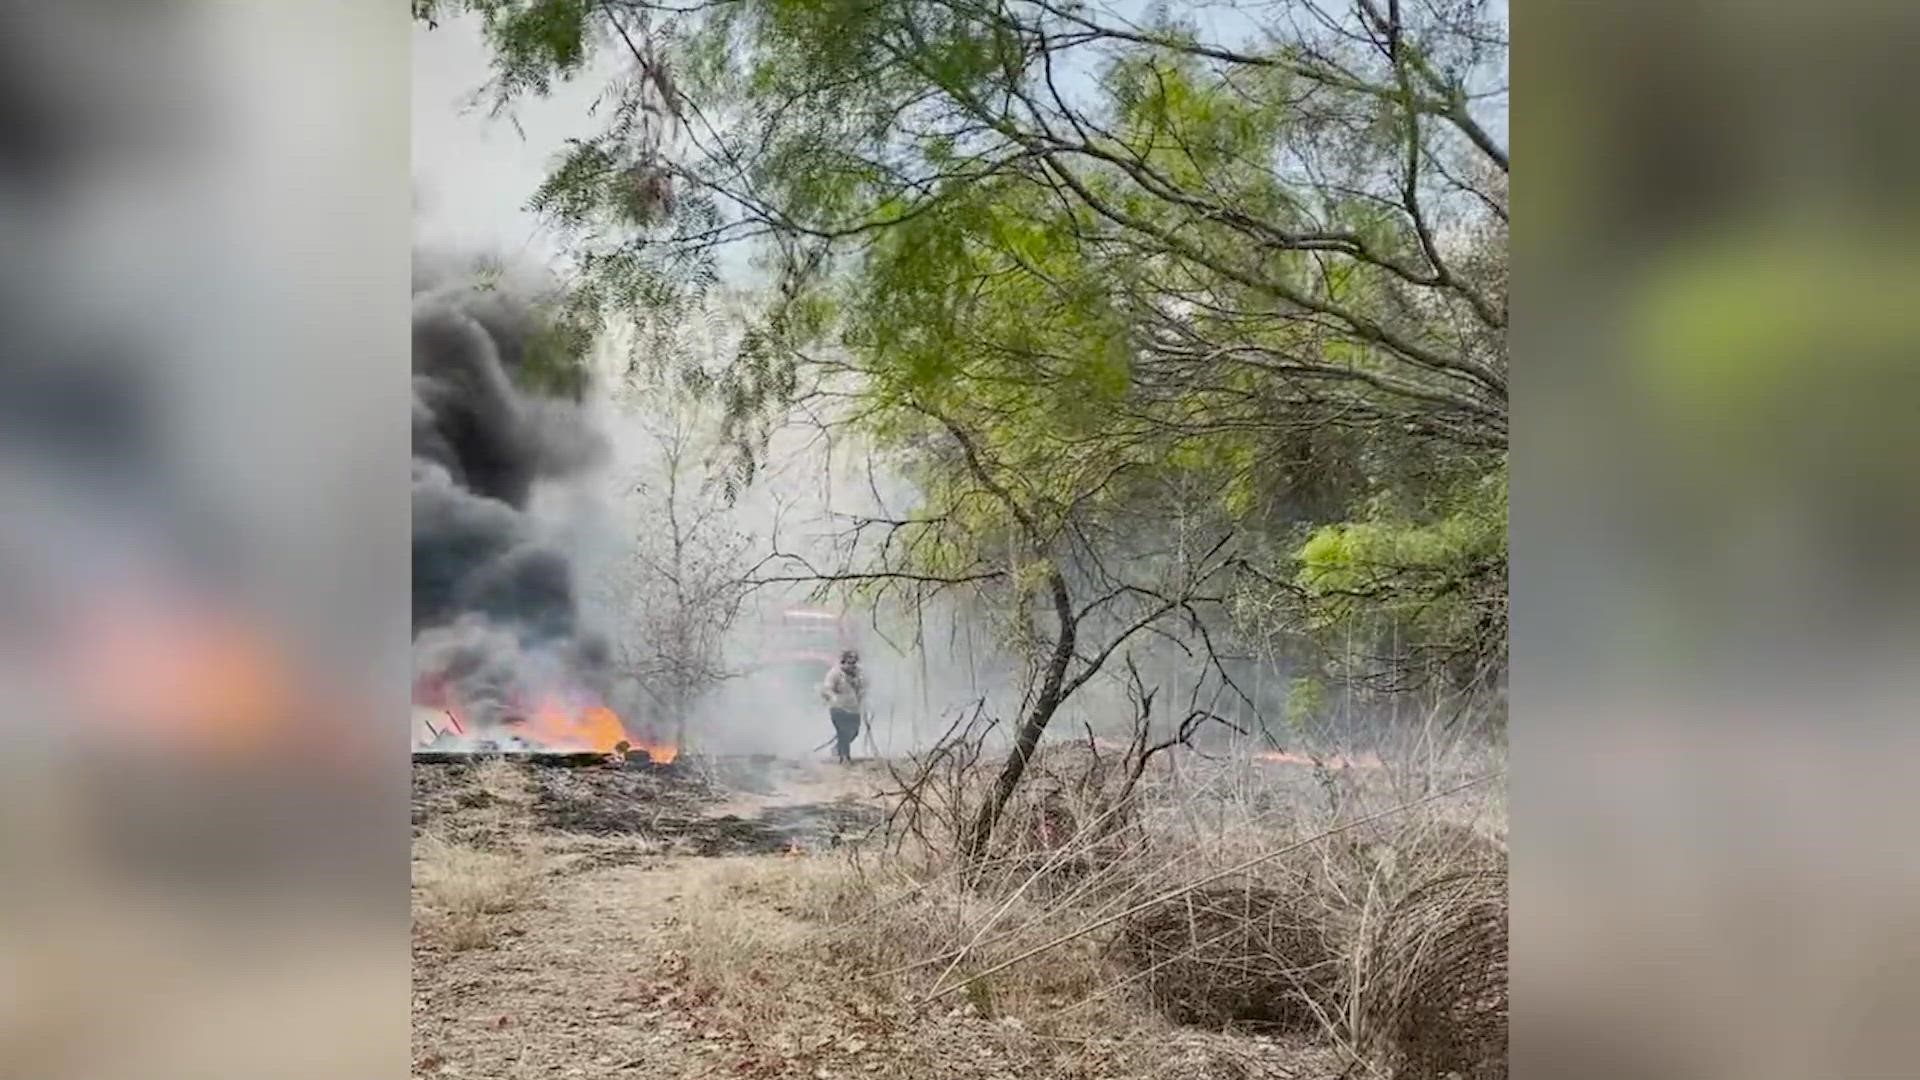 Credit: Adriana Olalde | A large fire is burning in the southeast side of Bexar County Monday afternoon, according to the San Antonio Fire Department.